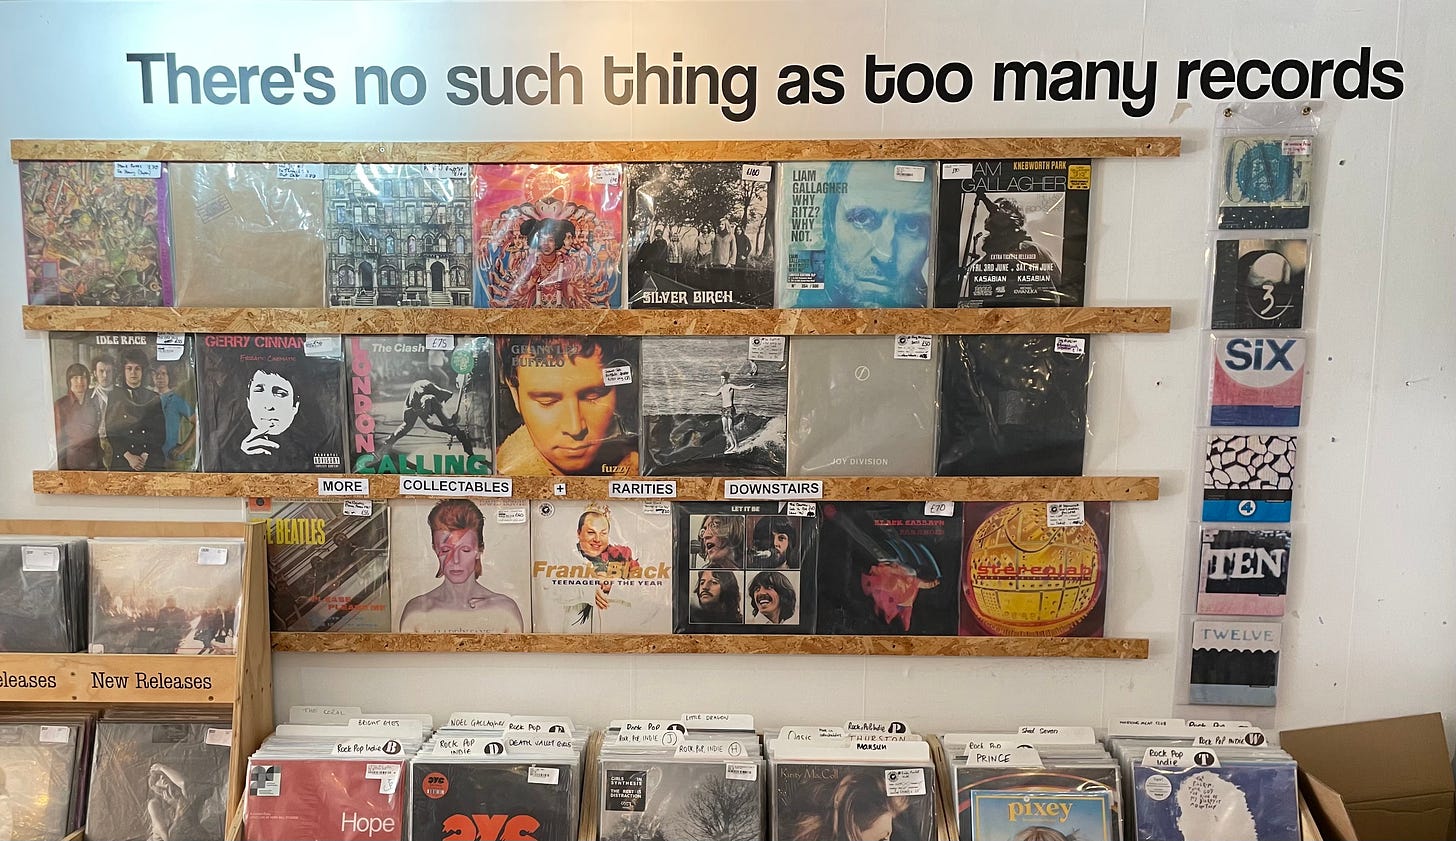 Motivational quotes for record shoppers on the collectibles wall in The Vinyl Whistle